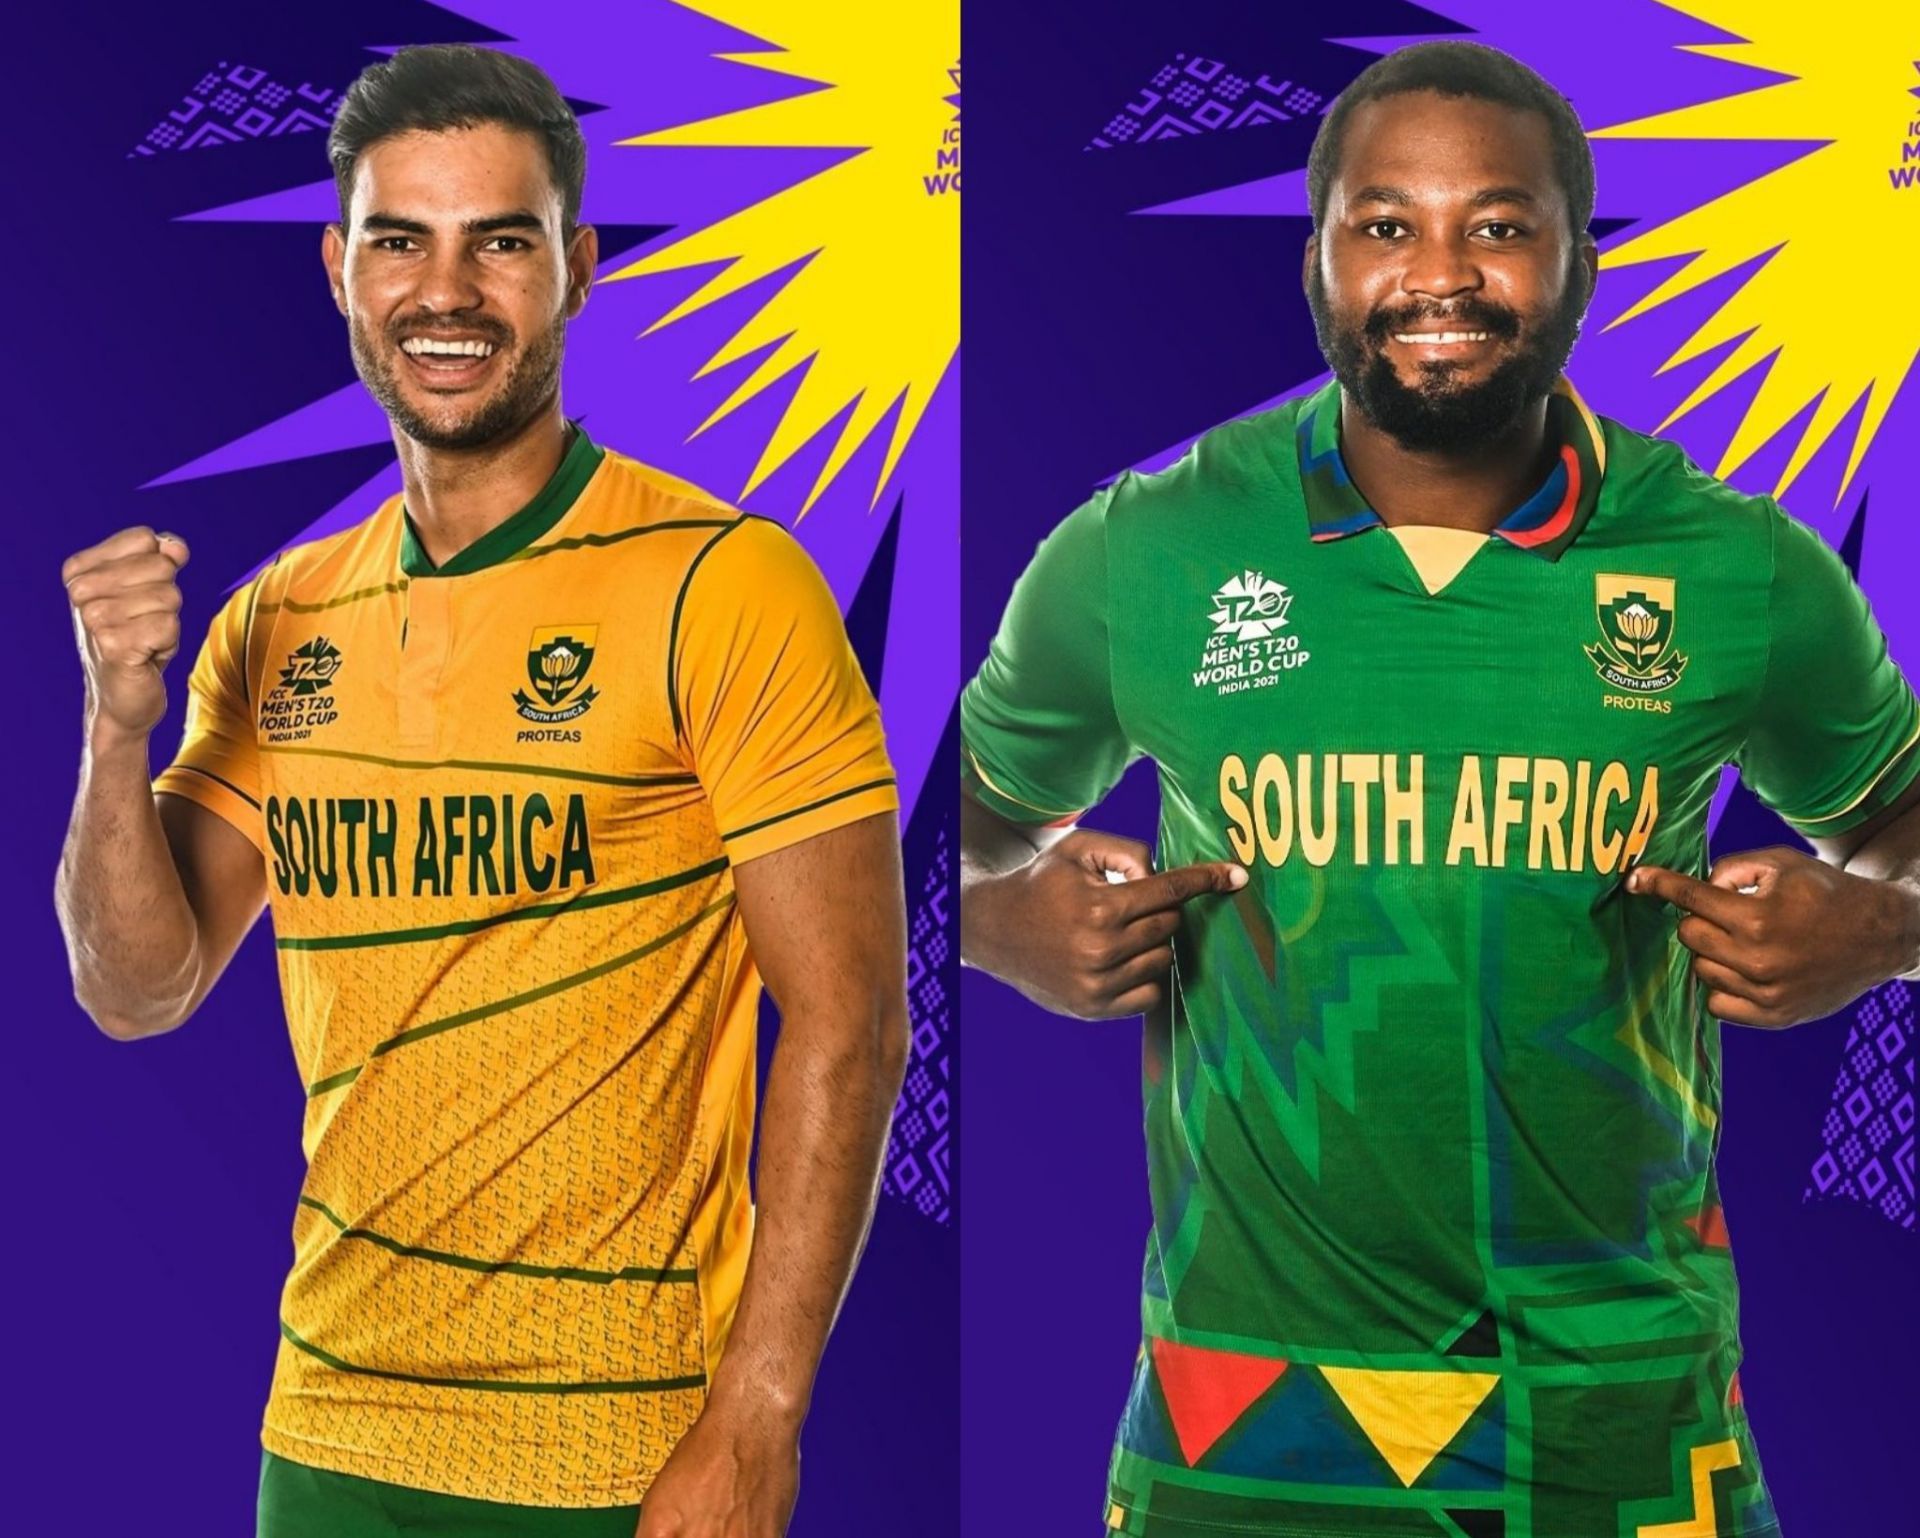 South Africa jersey for the T20 World Cup 2021